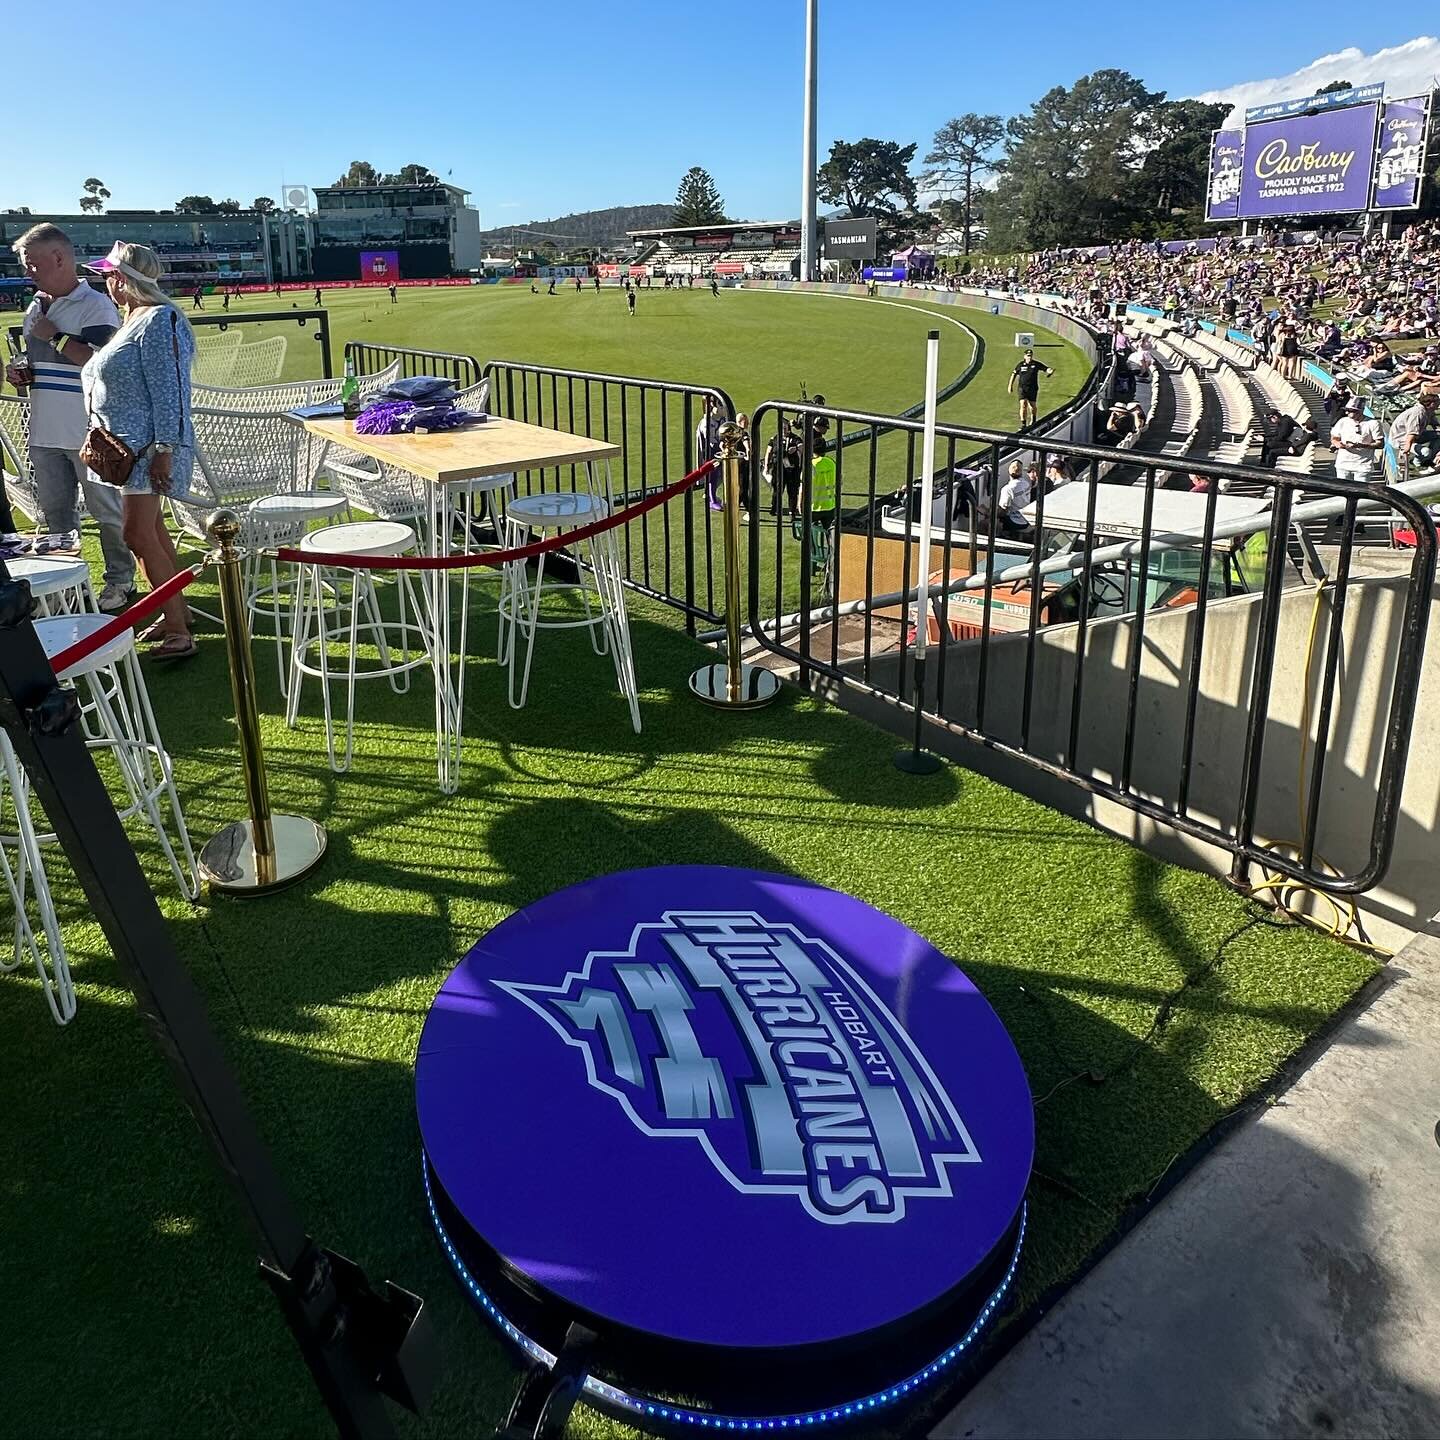 Find our 360 Photo Booth at the @redzed_lending stand at @hobarthurricanes 🏏

#redzed #hobarthurricanes #hobartphotobooth